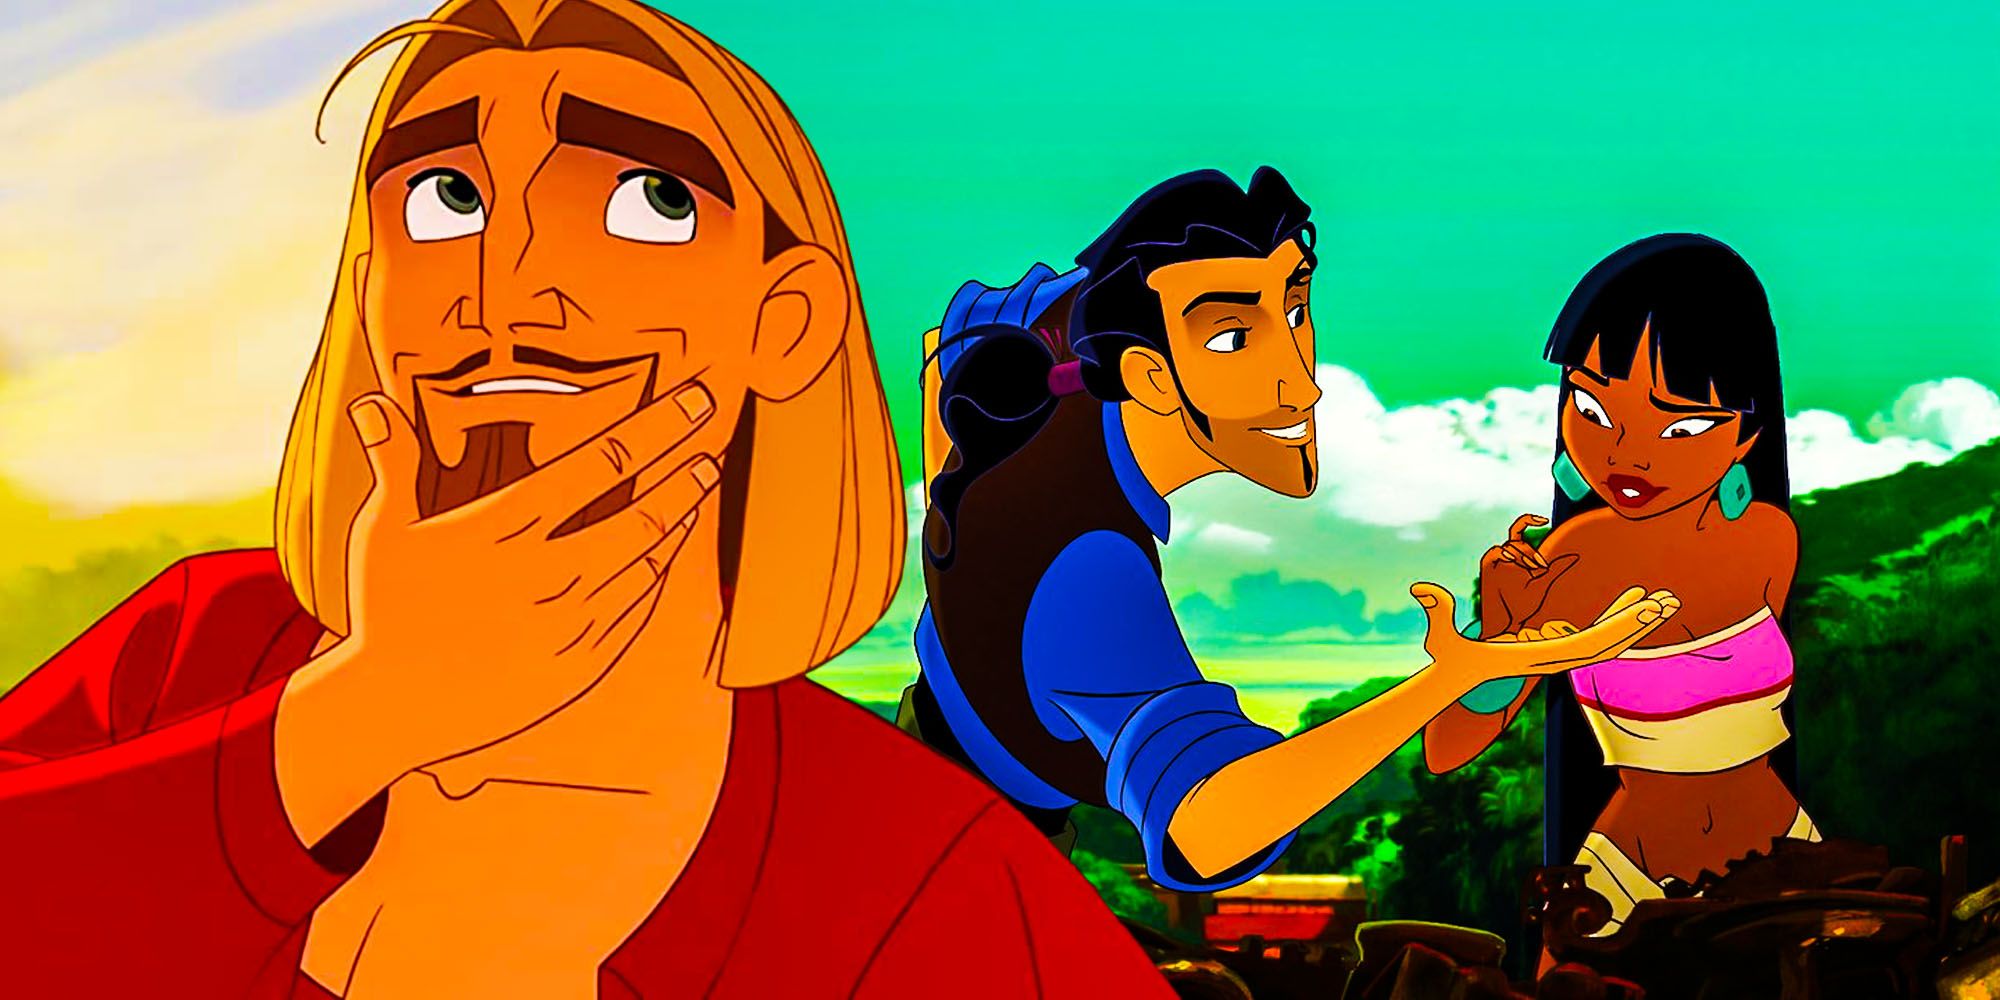 Why The Road To El Dorado Bombed In 2000 (But Is Beloved Now)